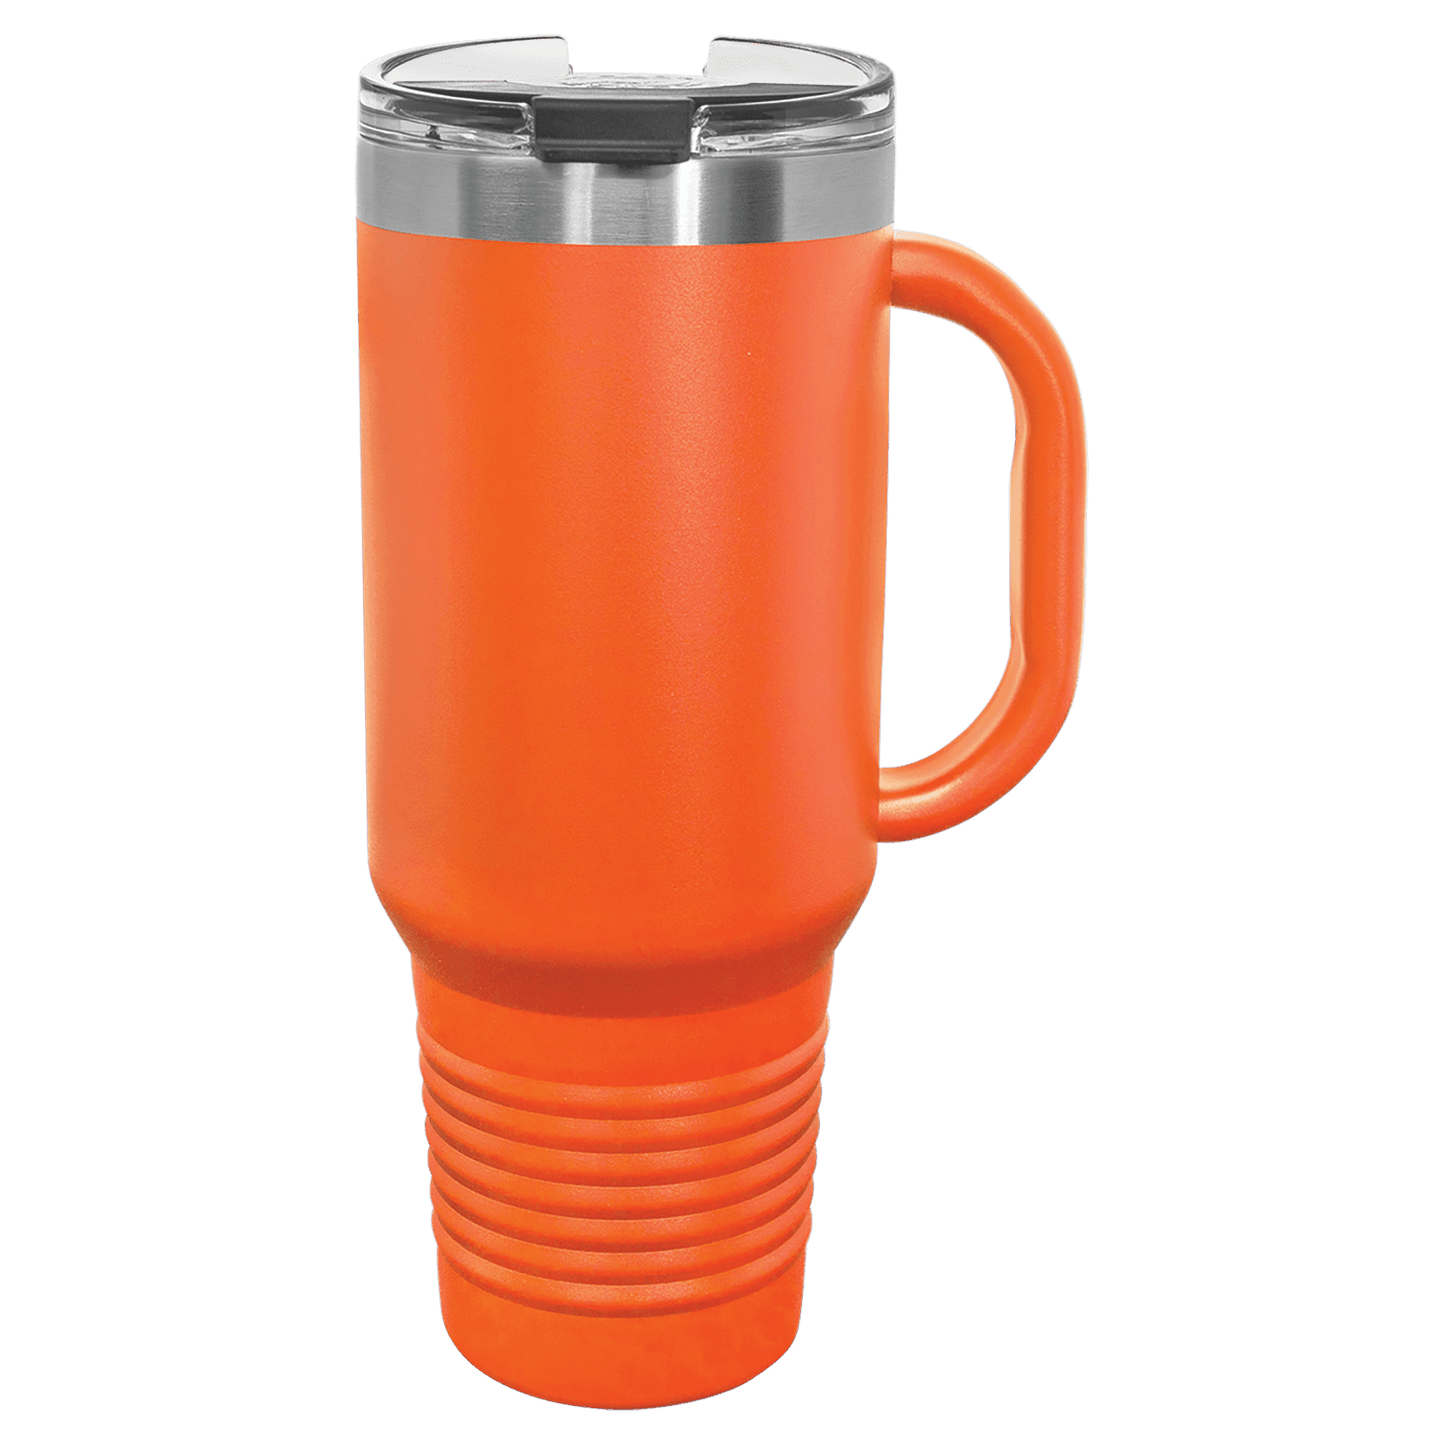 Engraved Polar Camel 40 OZ. Vacuum Insulated Mug With Lid and Straw